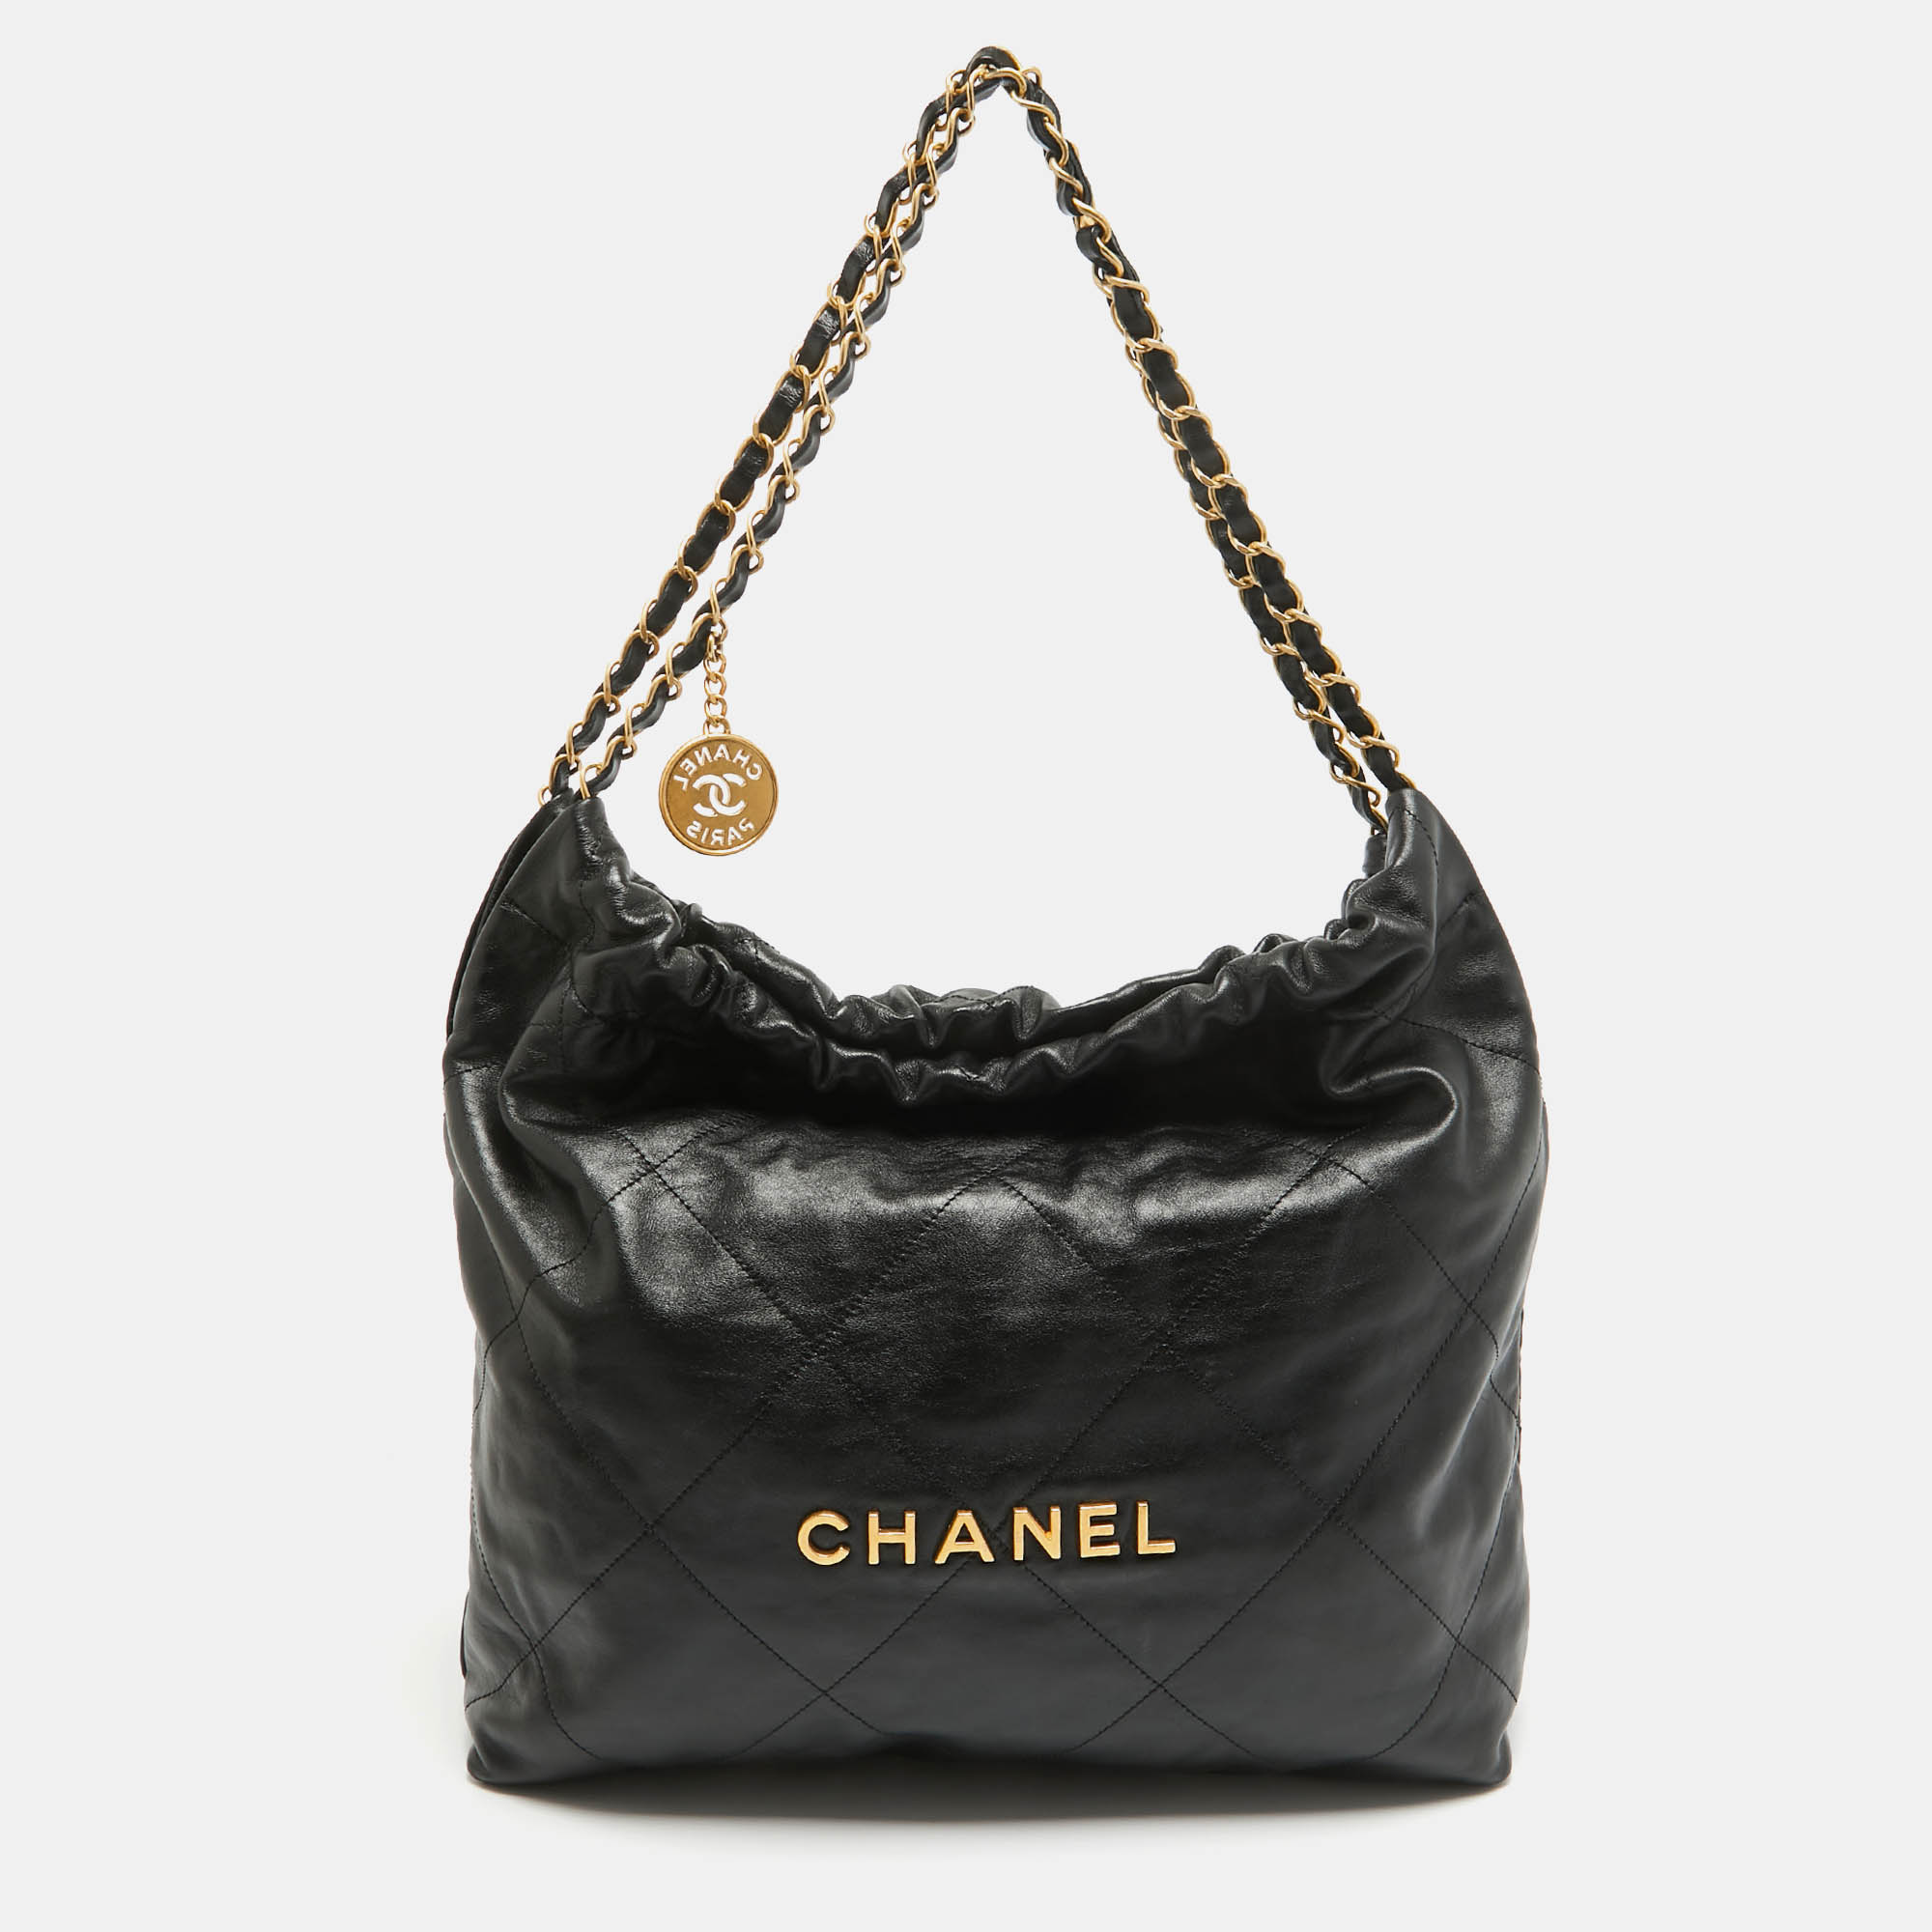 Chanel black quilted leather medium 22 hobo